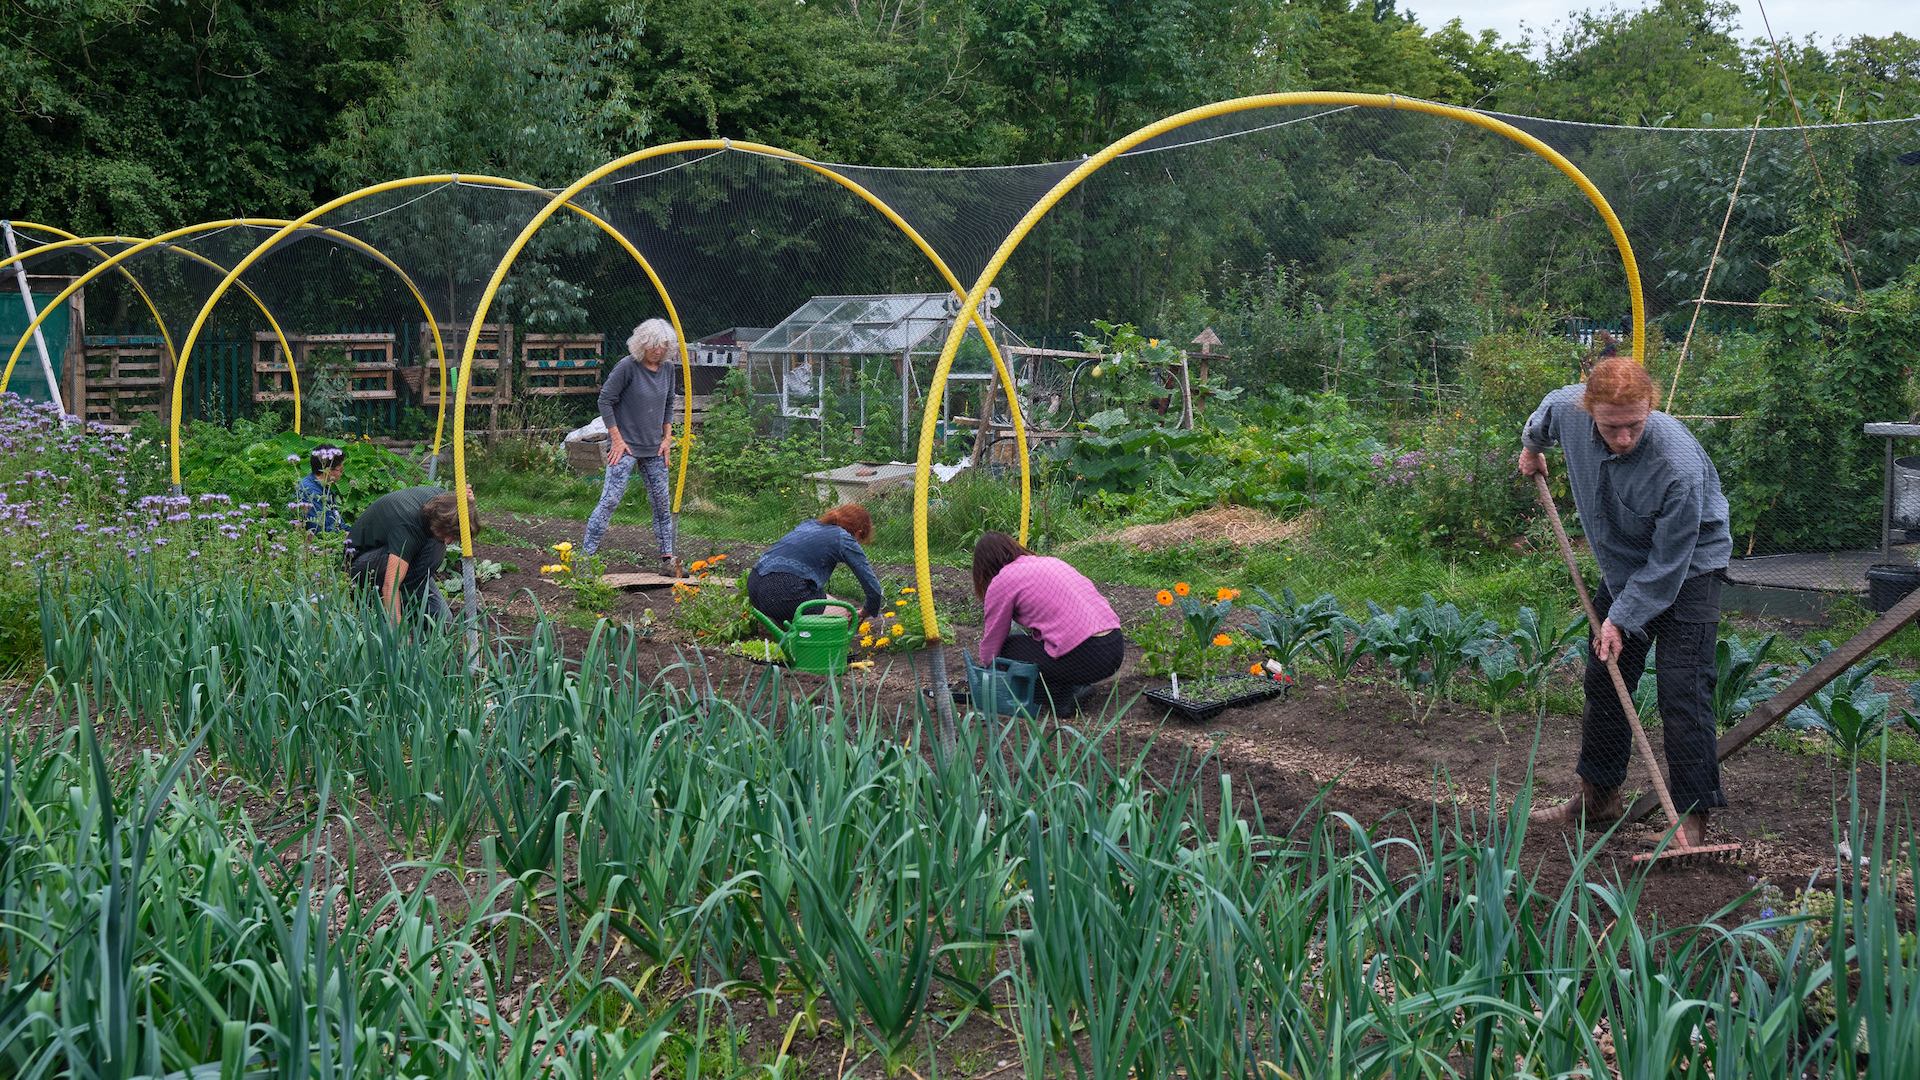 Group of people in an allotment